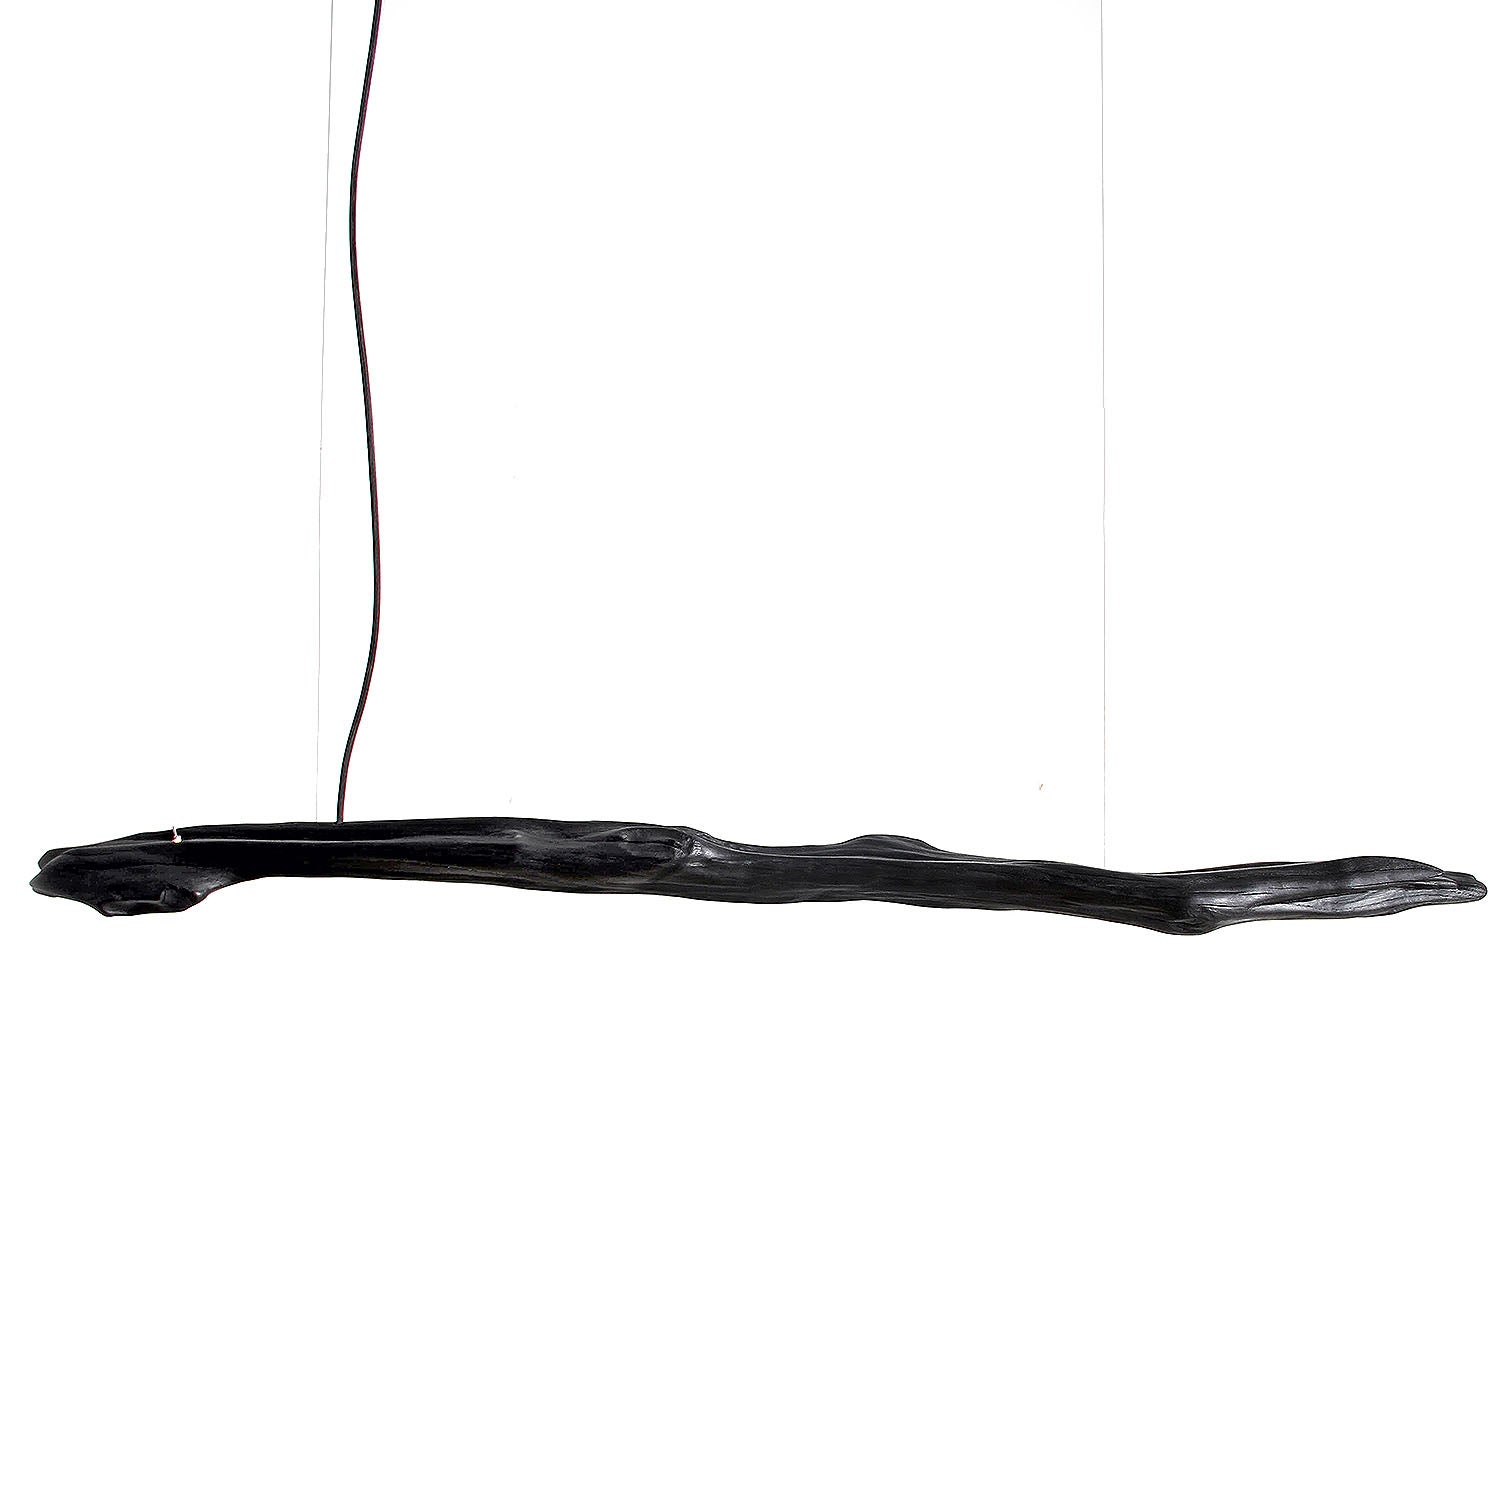 Contemporary black wooden pendant light - Burning Ego by Wim Verzantvoort for WDSTCK

Design: Wim Verzantvoort
Materials: Burned Oak wood
Features: Dimmable LED driver

Prices: 
< 220 cm: € 5.160,-
< 300 cm: € 6.020,-
> 300 cm: on